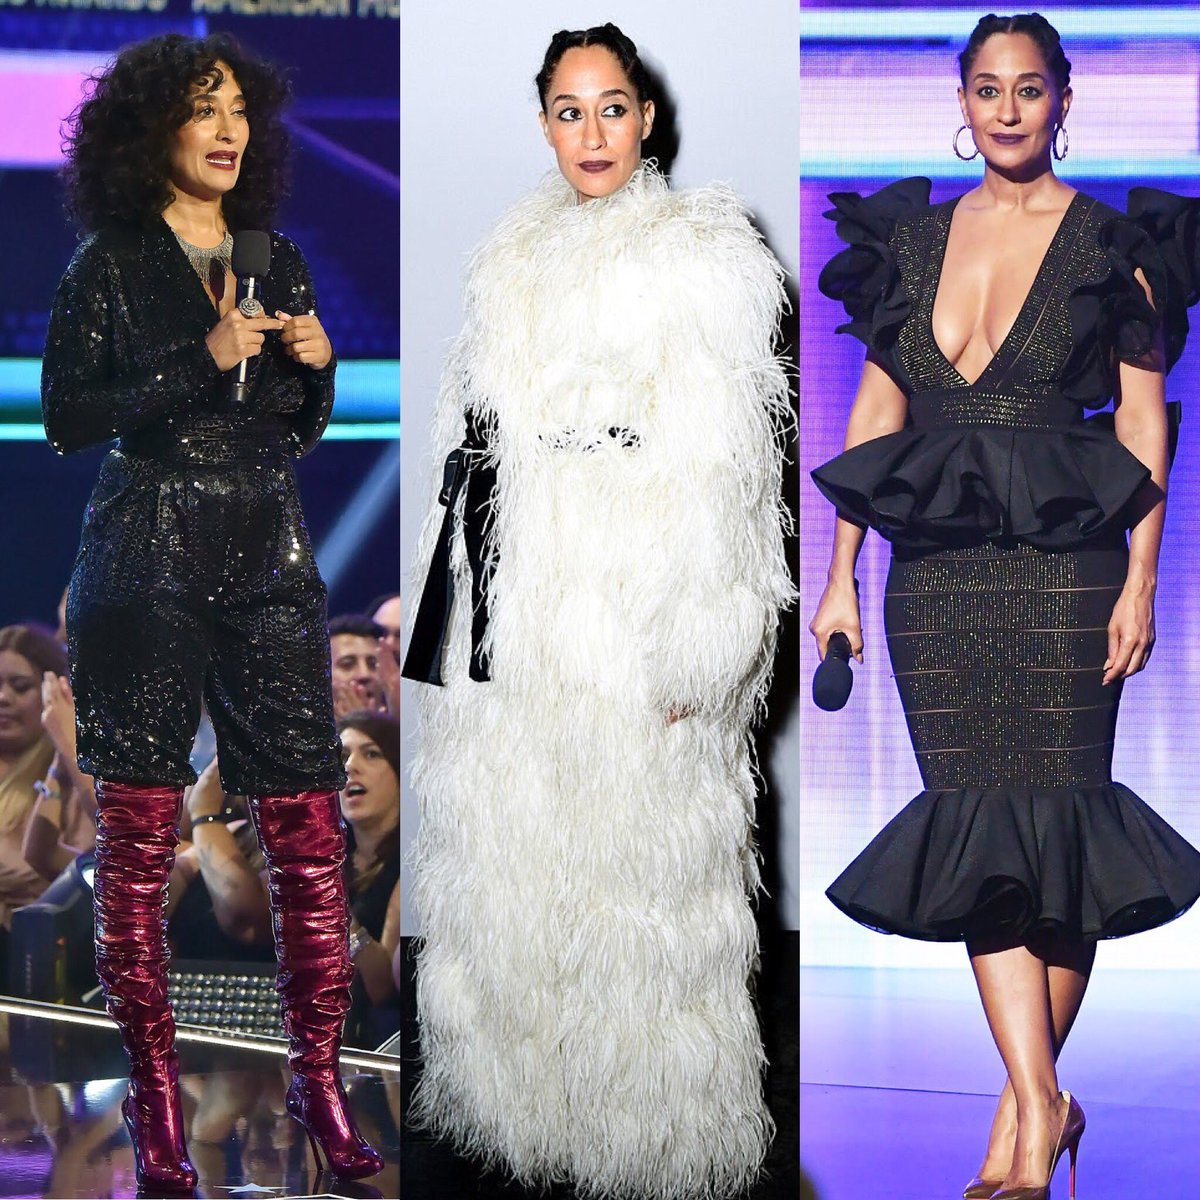 Tracee Ellis Ross hosting the AMAs in L.A.